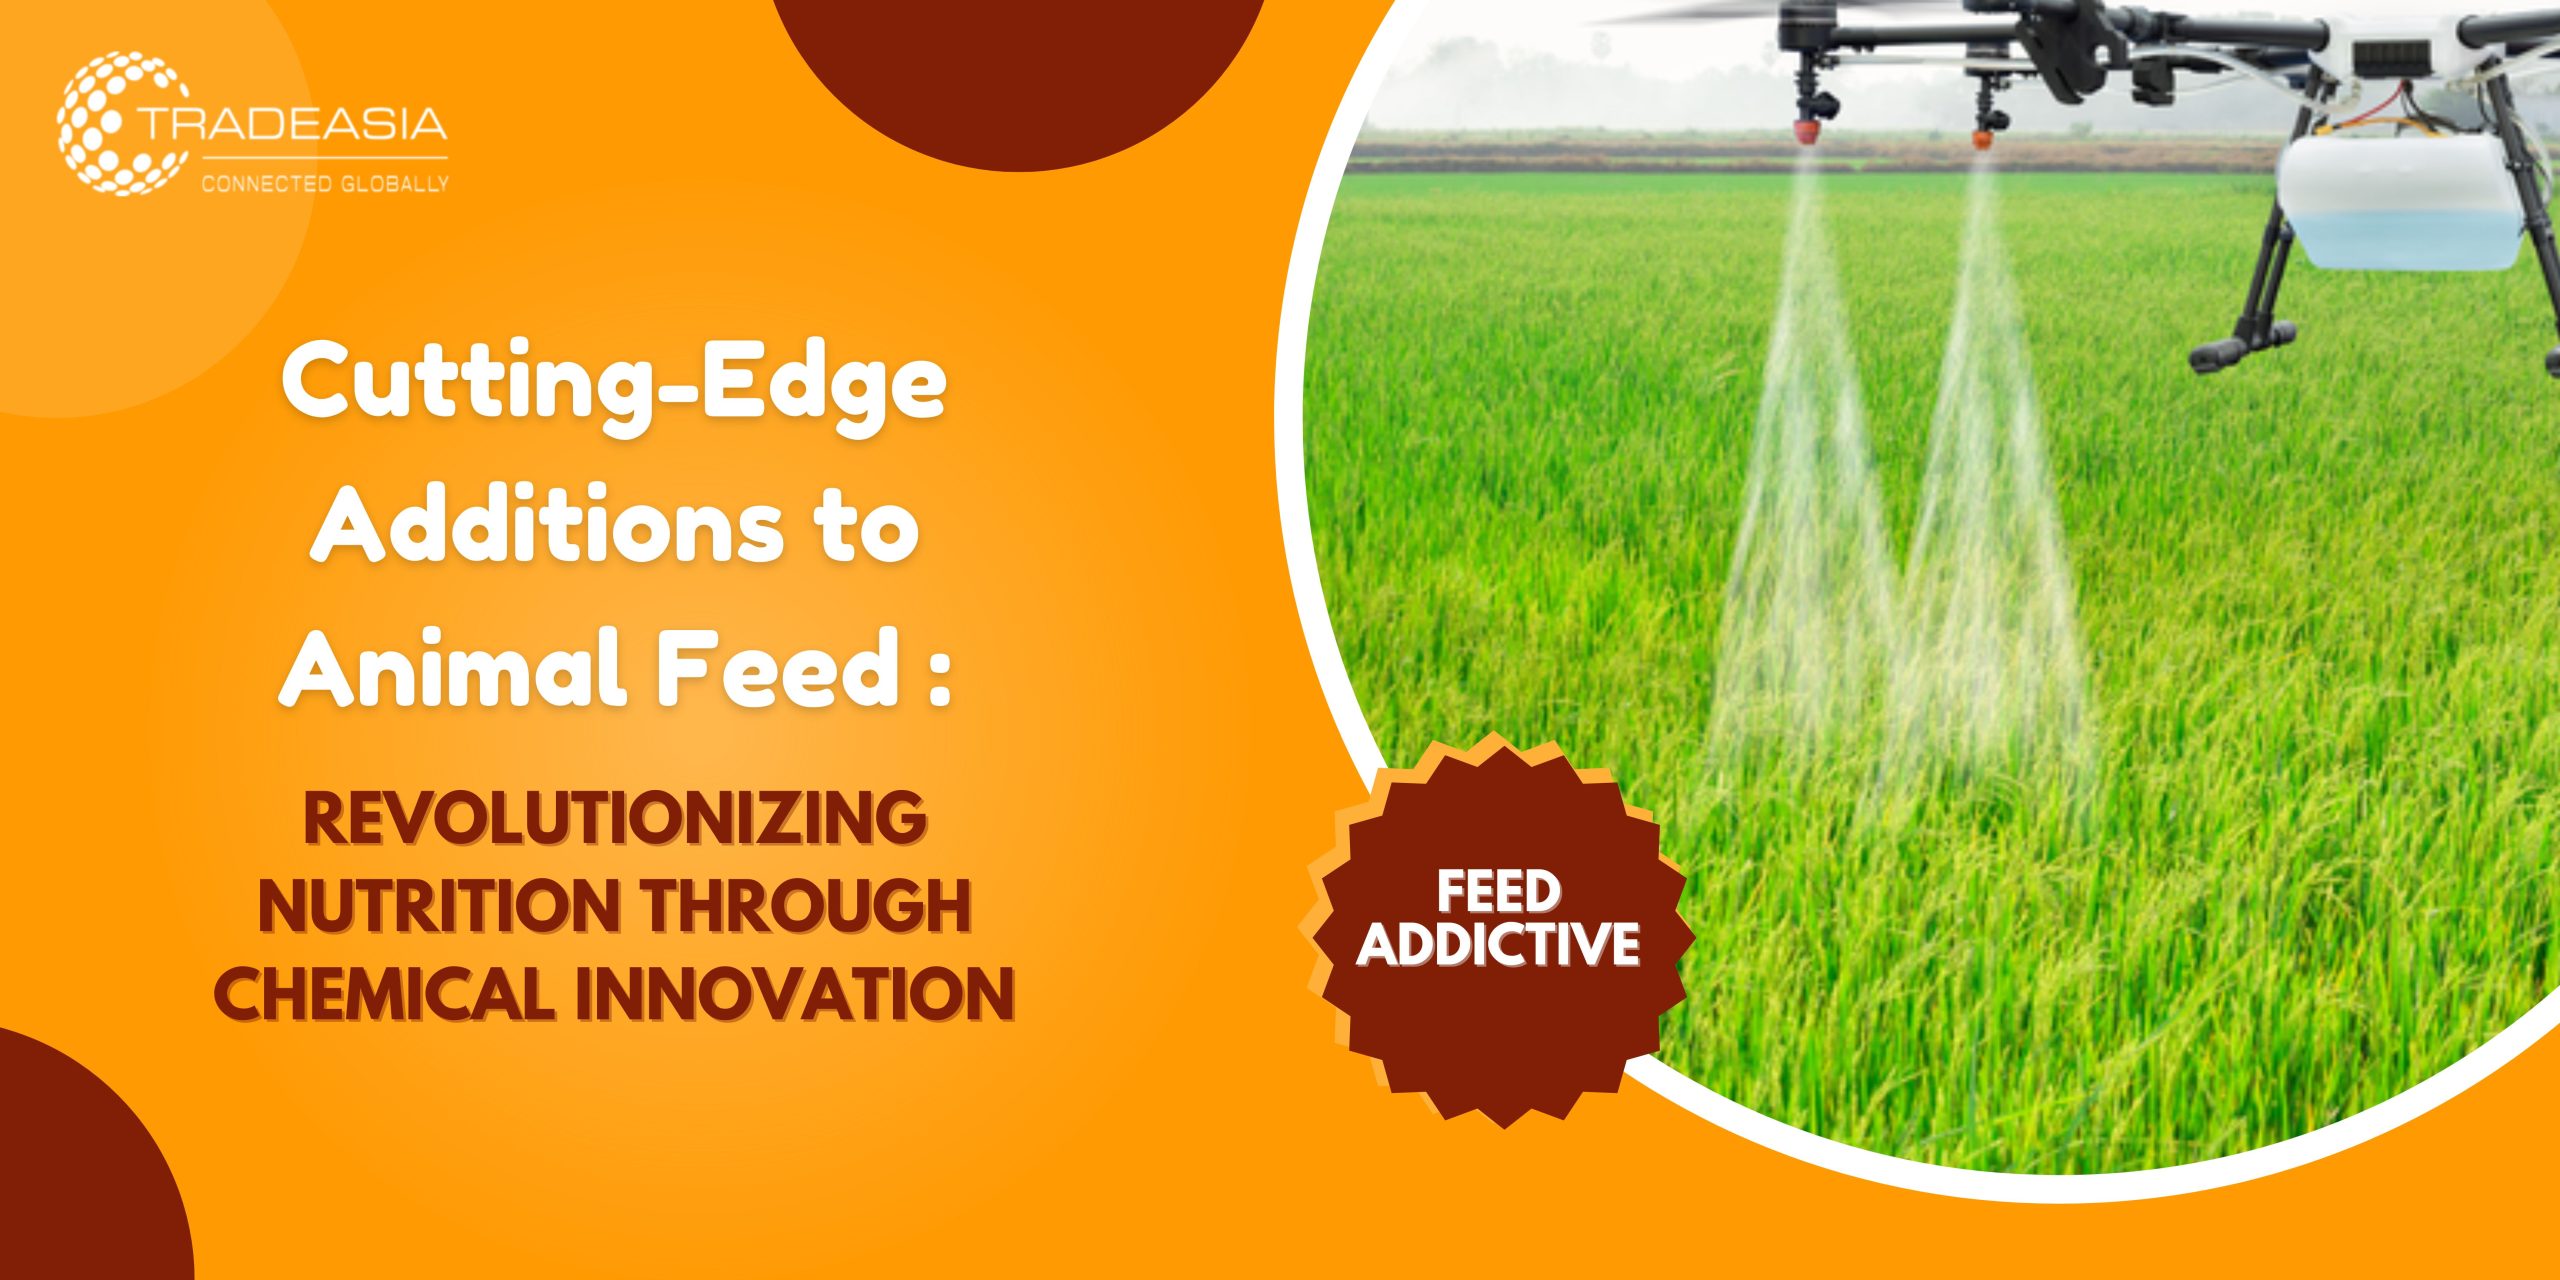 Cutting-Edge Additions to Animal Feed: Revolutionizing Nutrition through Chemical Innovation